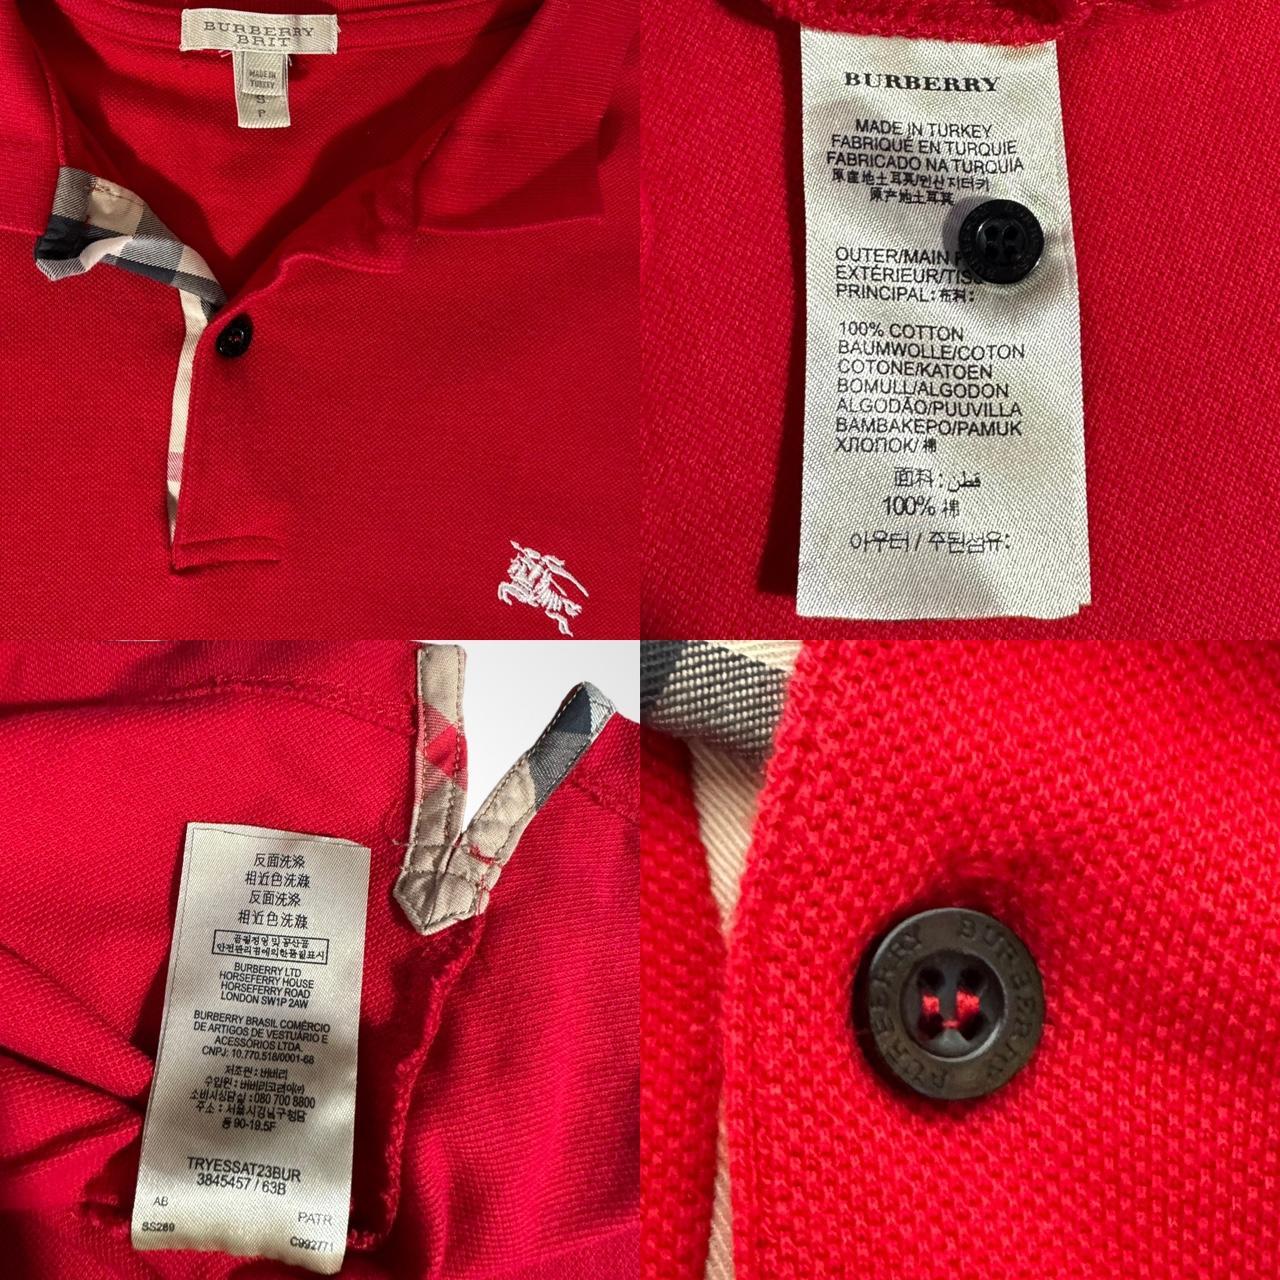 Vintage 90s Burberry red polo shirt